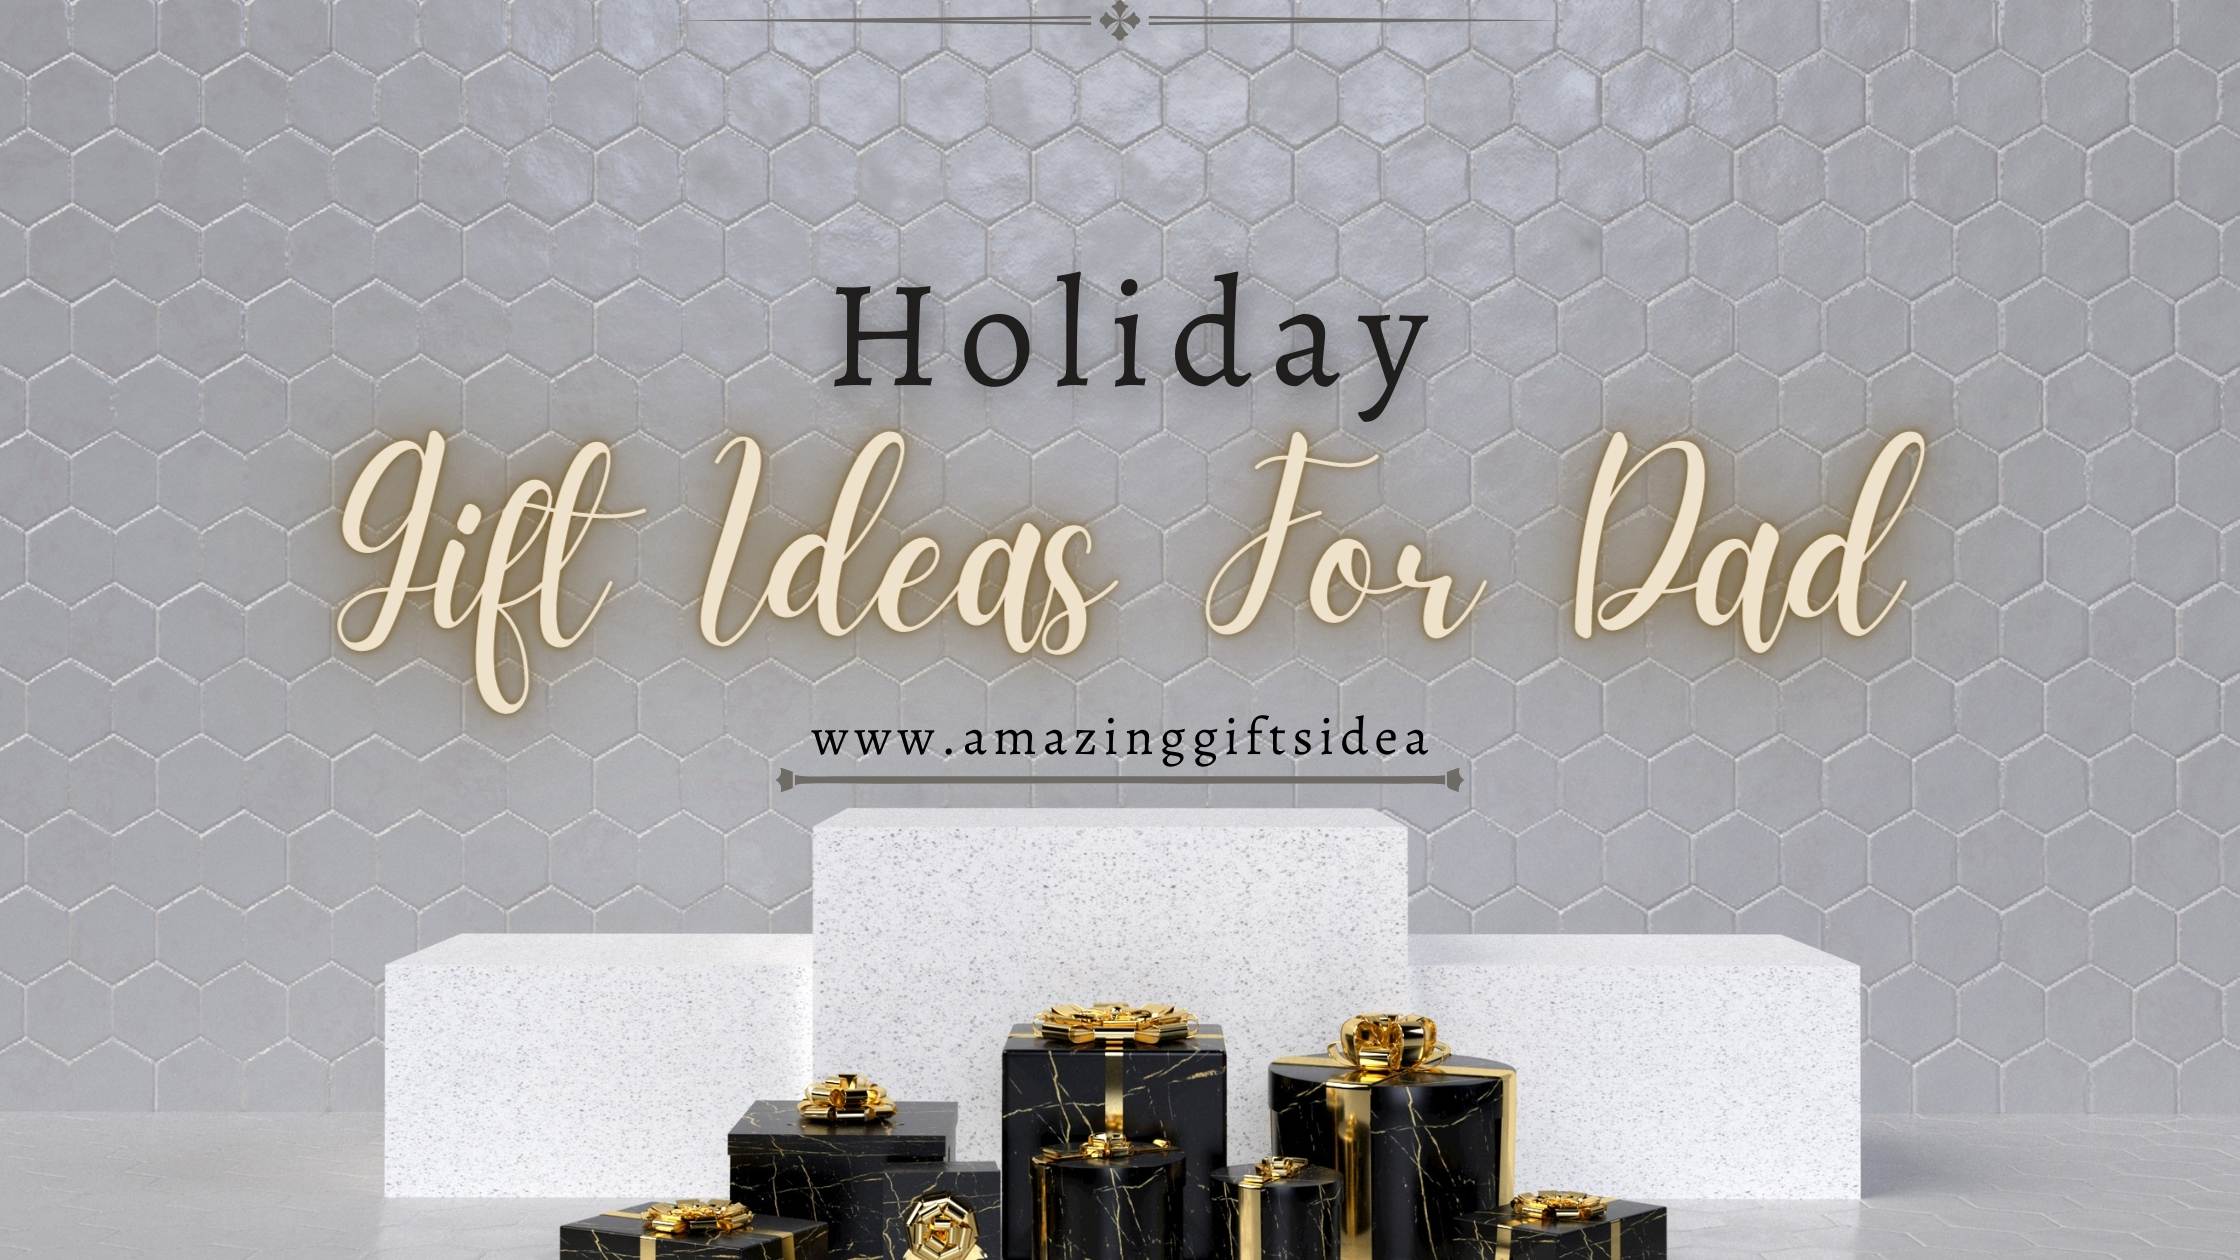 Best Holiday Gifts Ideas For Dad That Will Arrive On Time